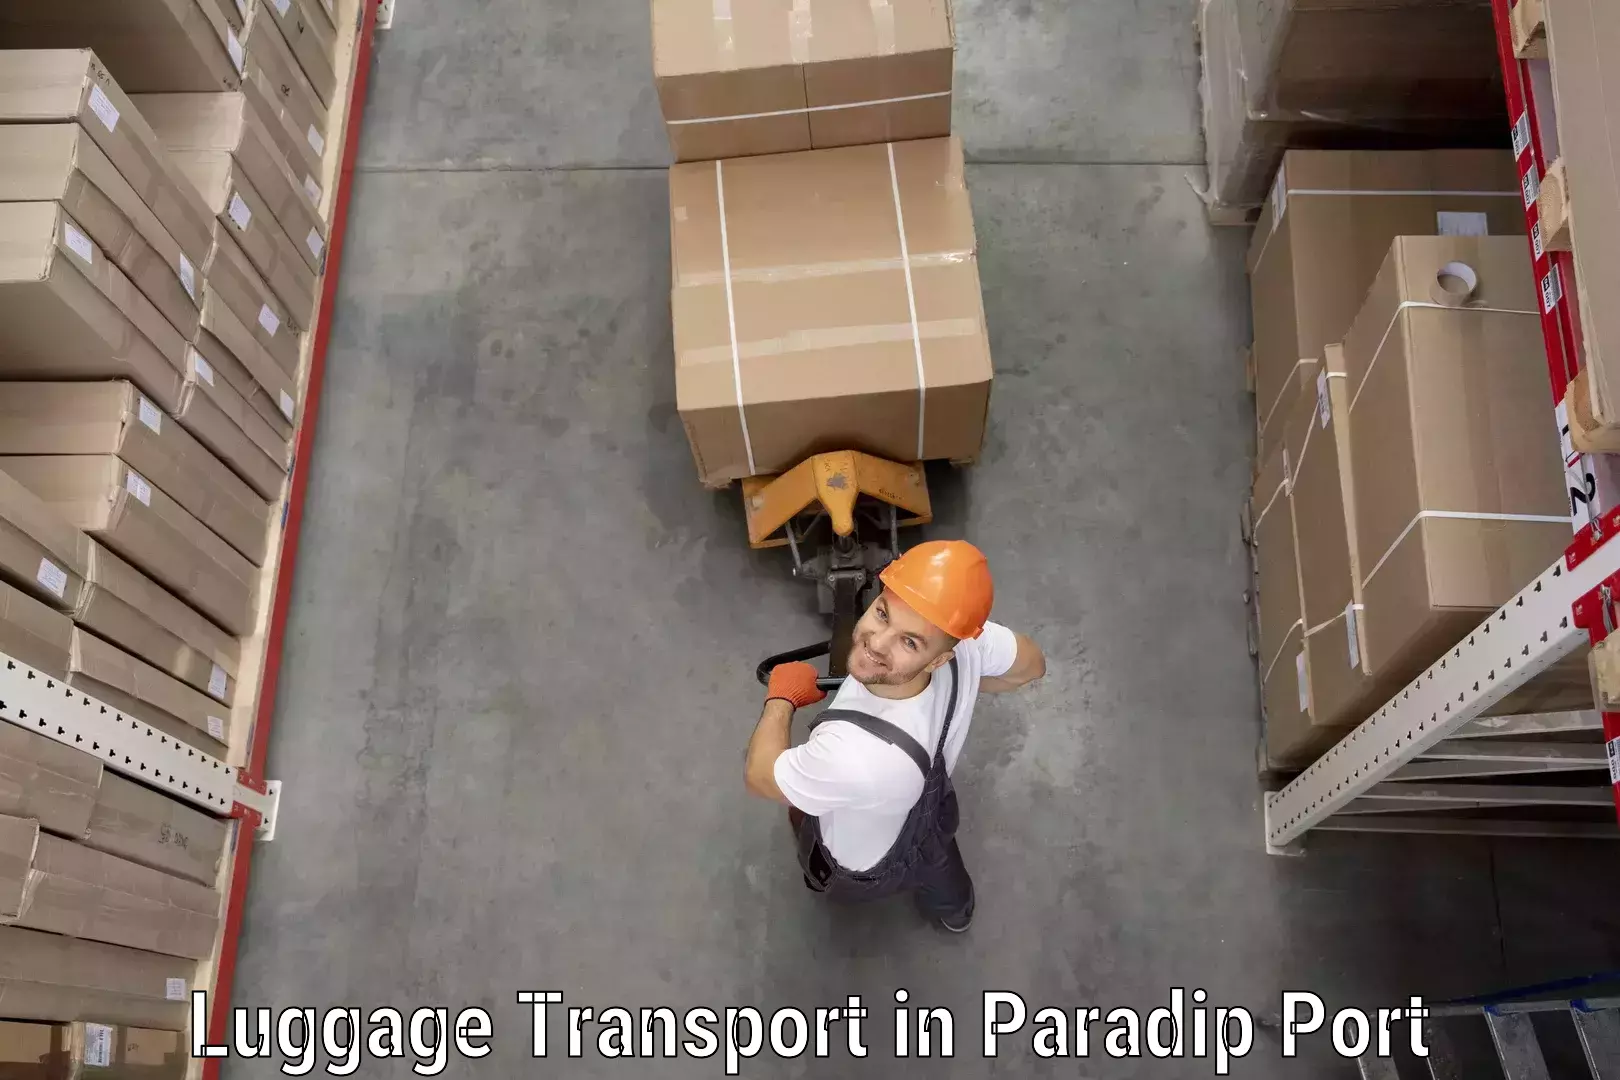 Excess baggage transport in Paradip Port